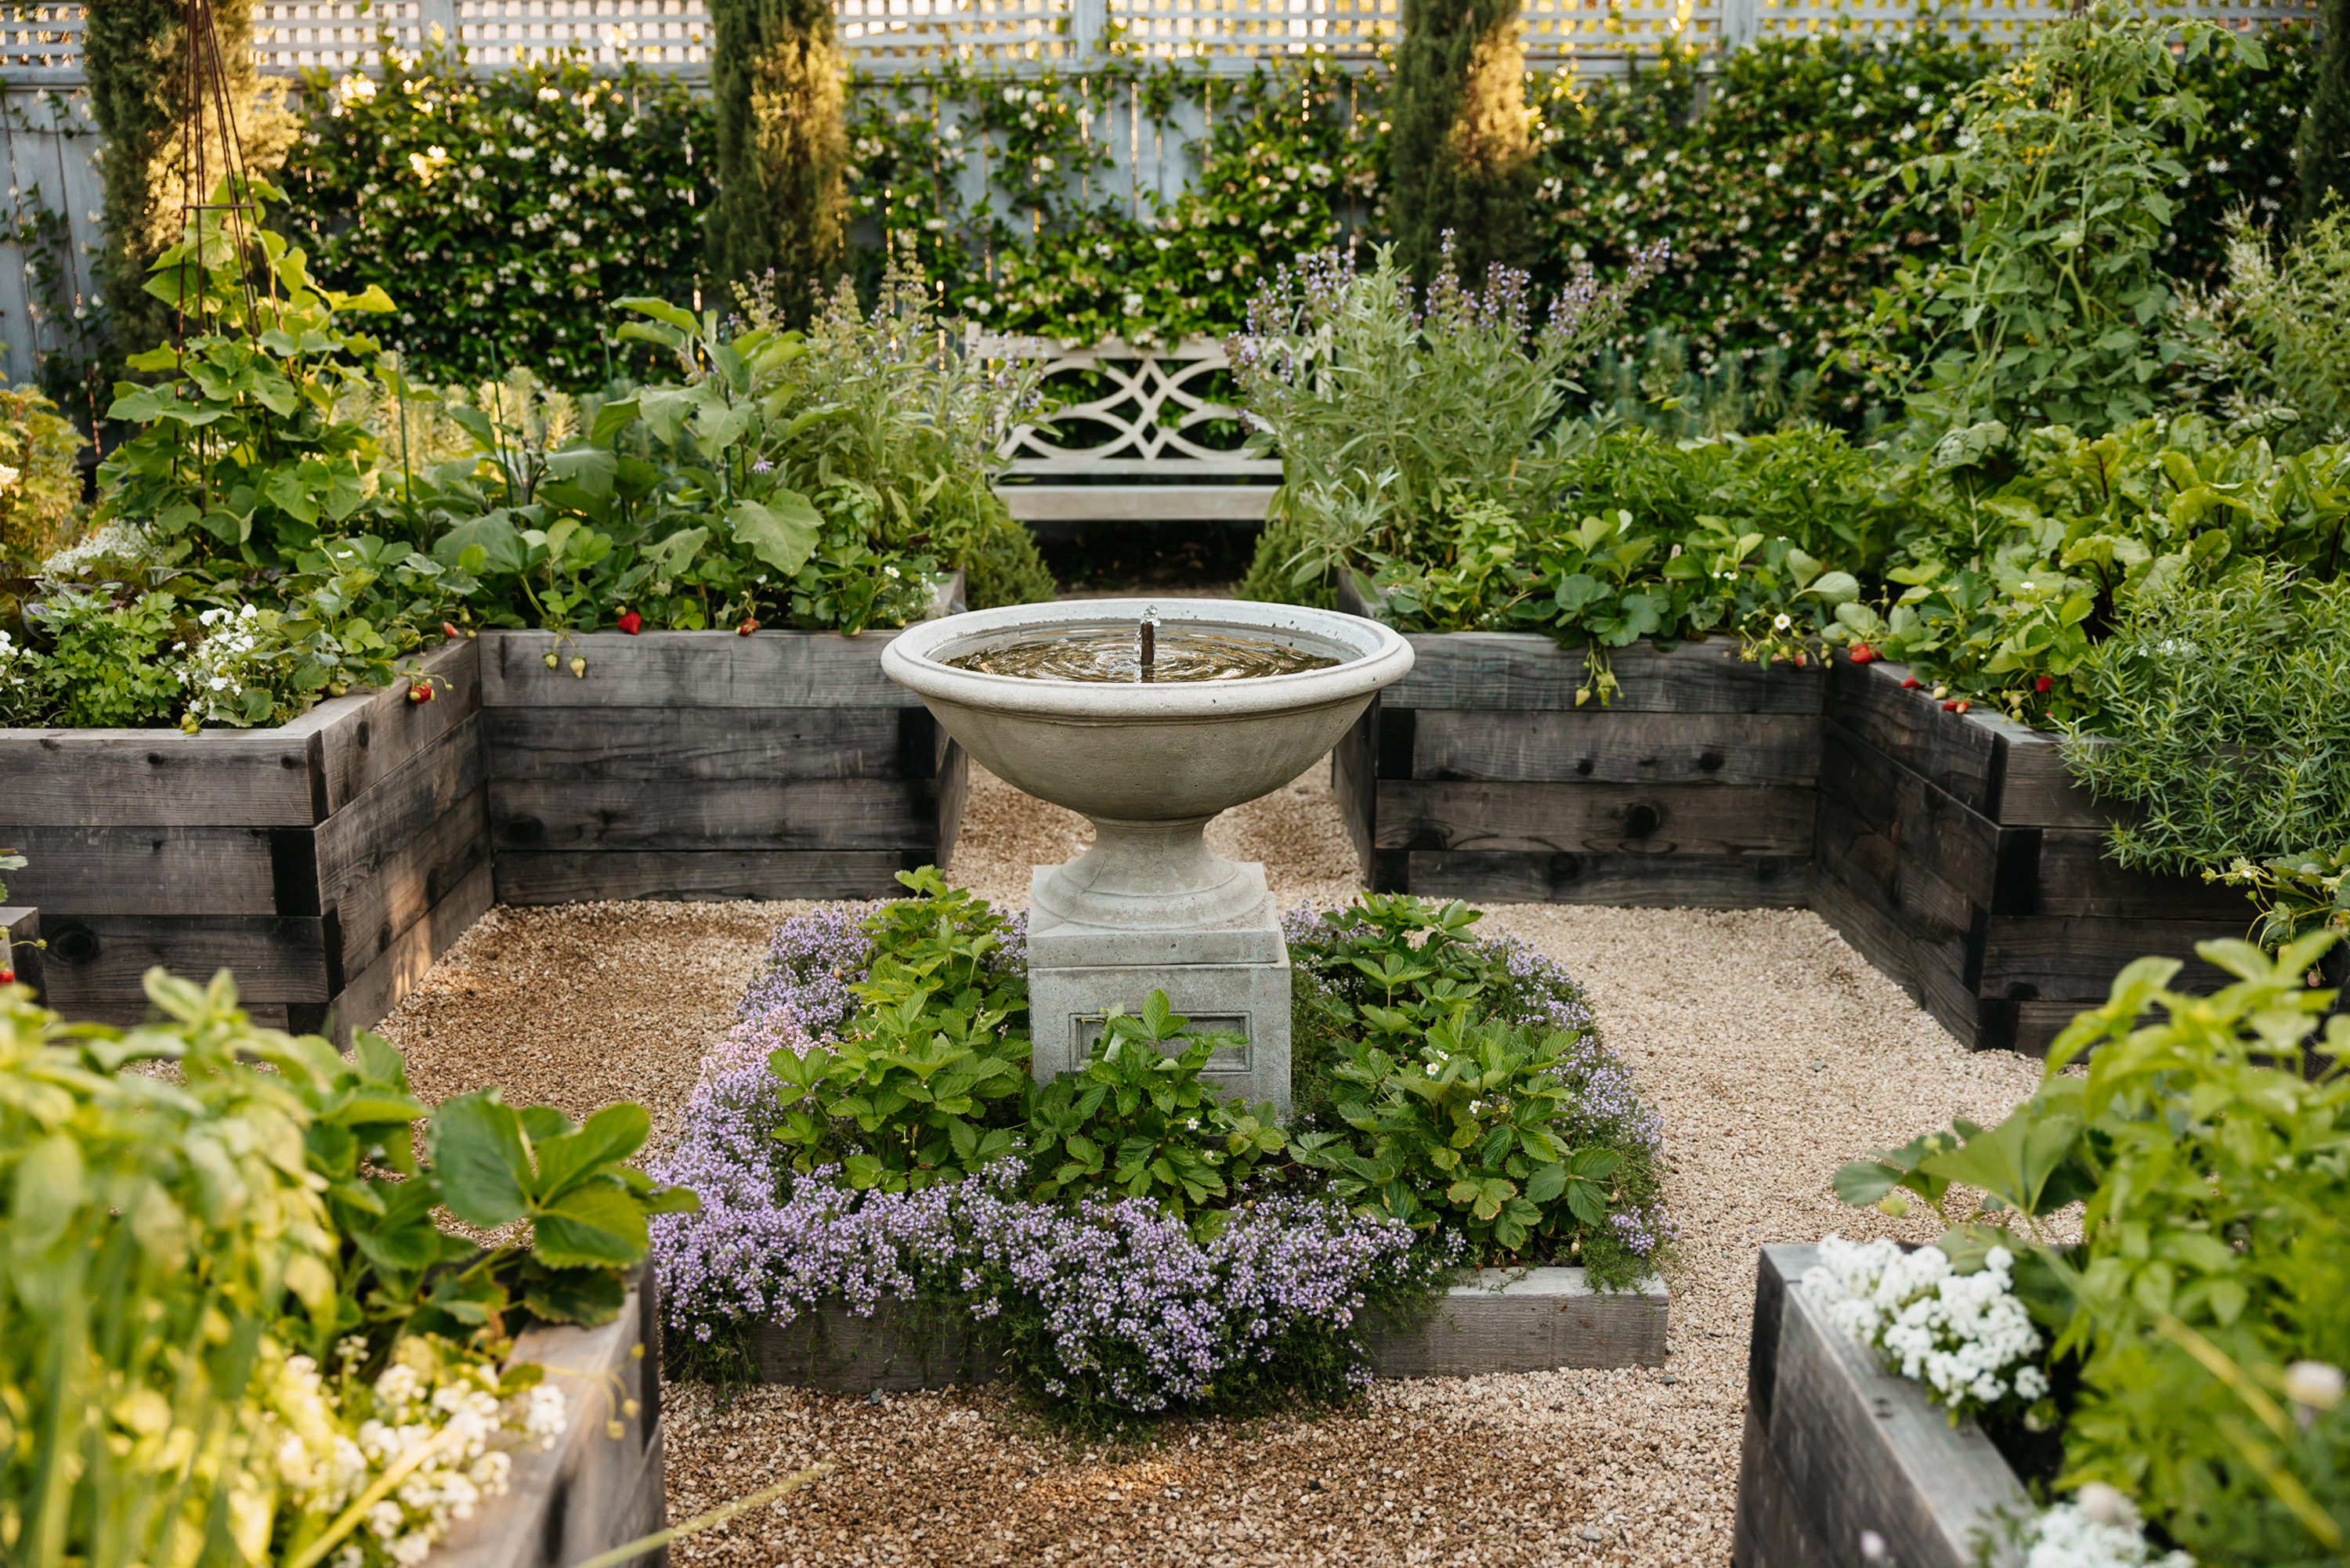 5 Raised Bed Gardening Tips You Should Know Before You Start